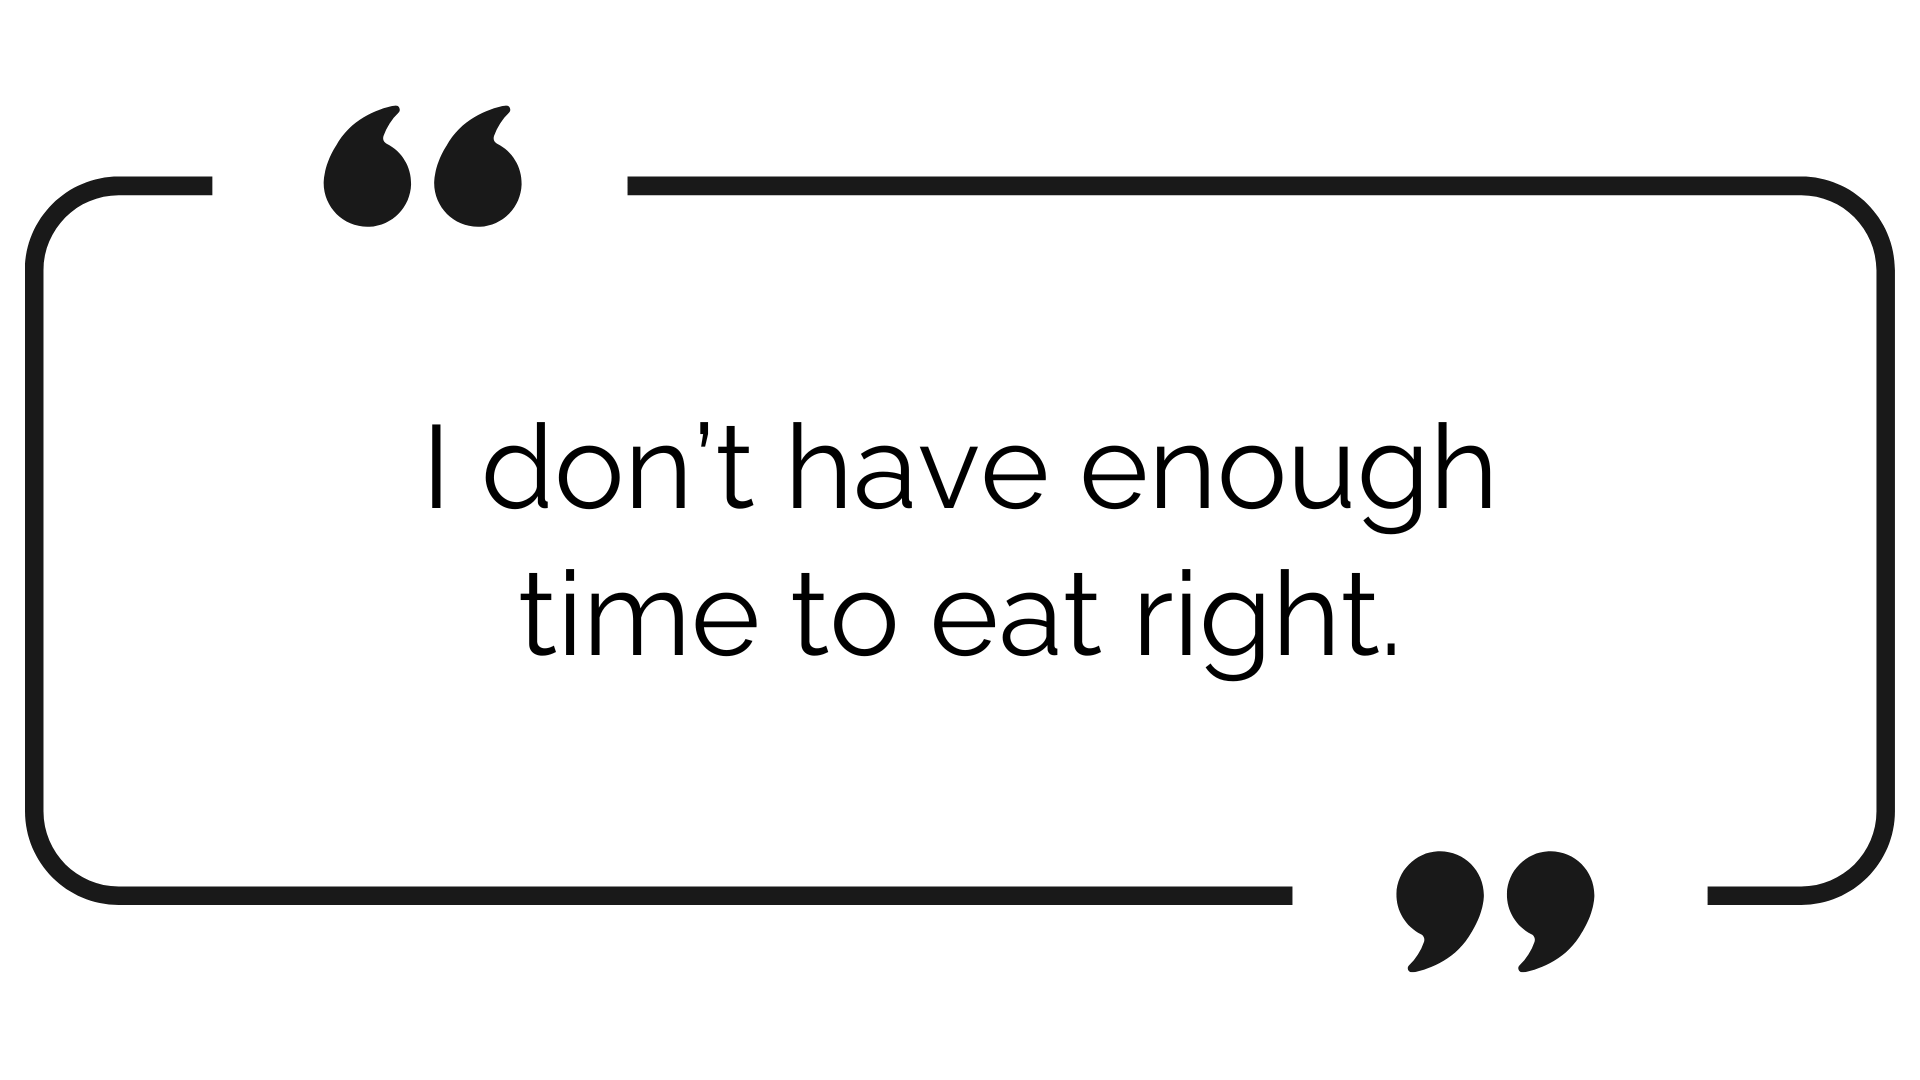 I don't have enough time to eat right.